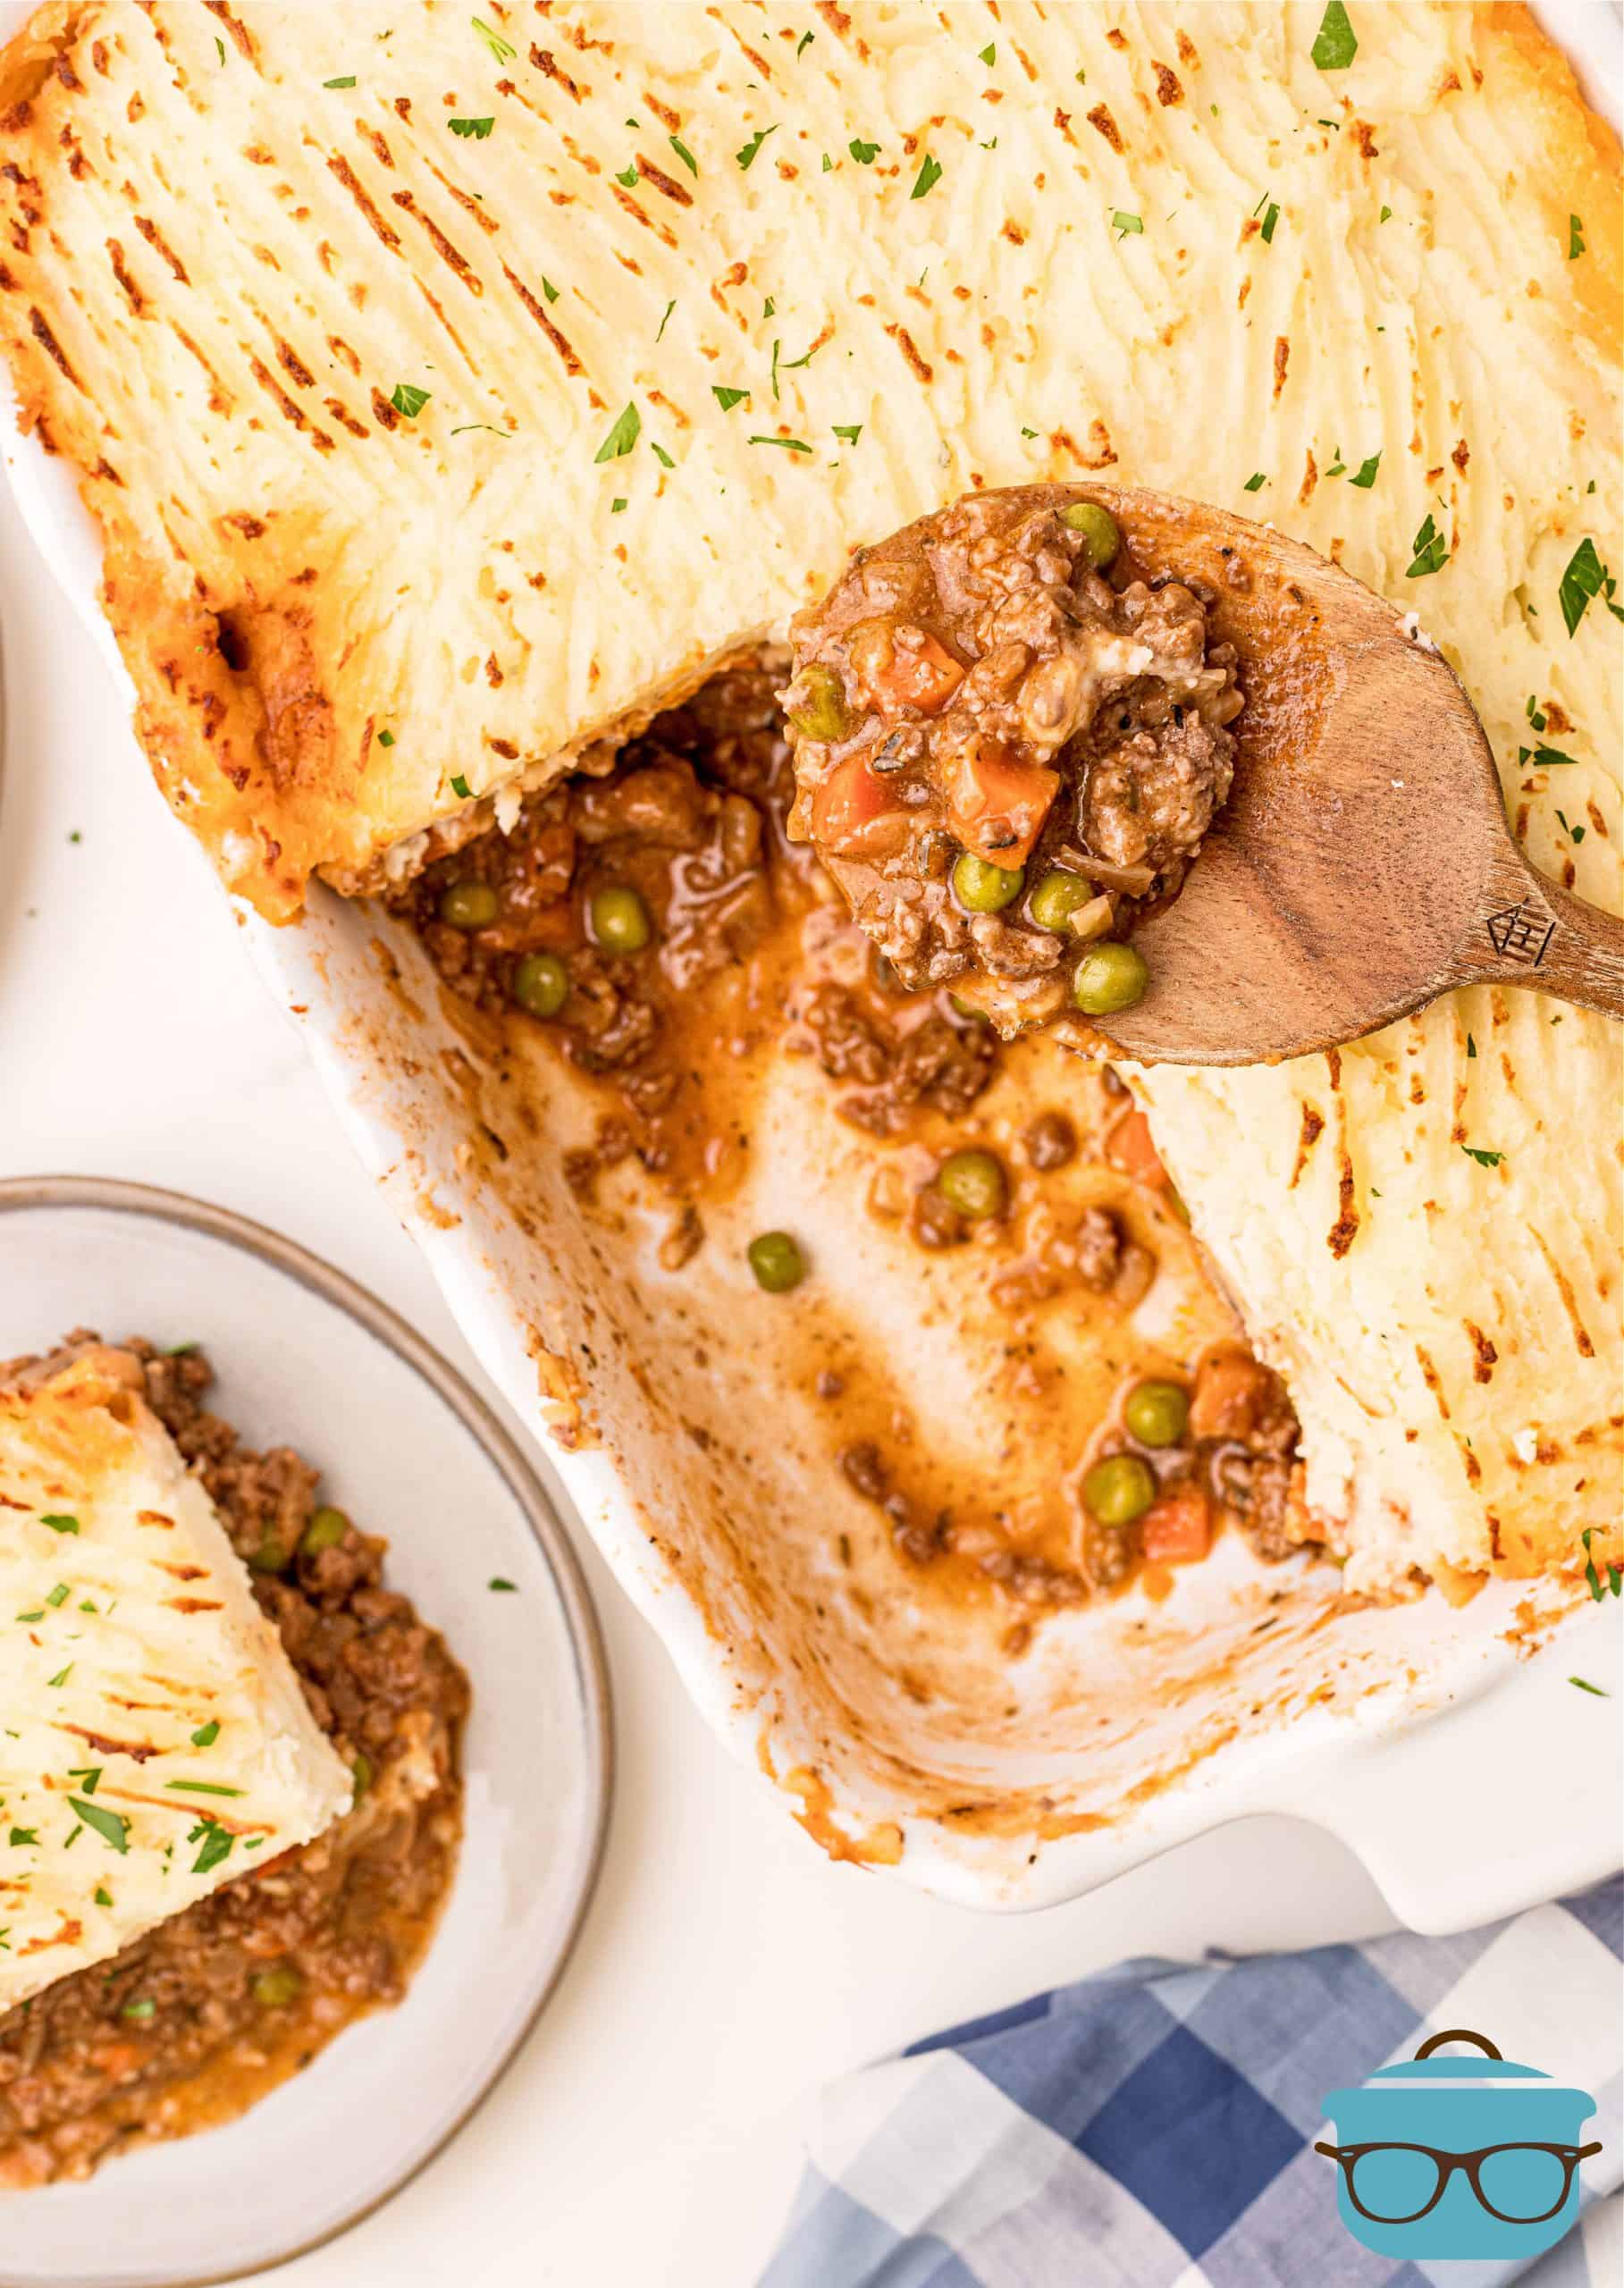 Overhead photo of slice of Shepherd's Pie on plate with some removed from casserole dish.